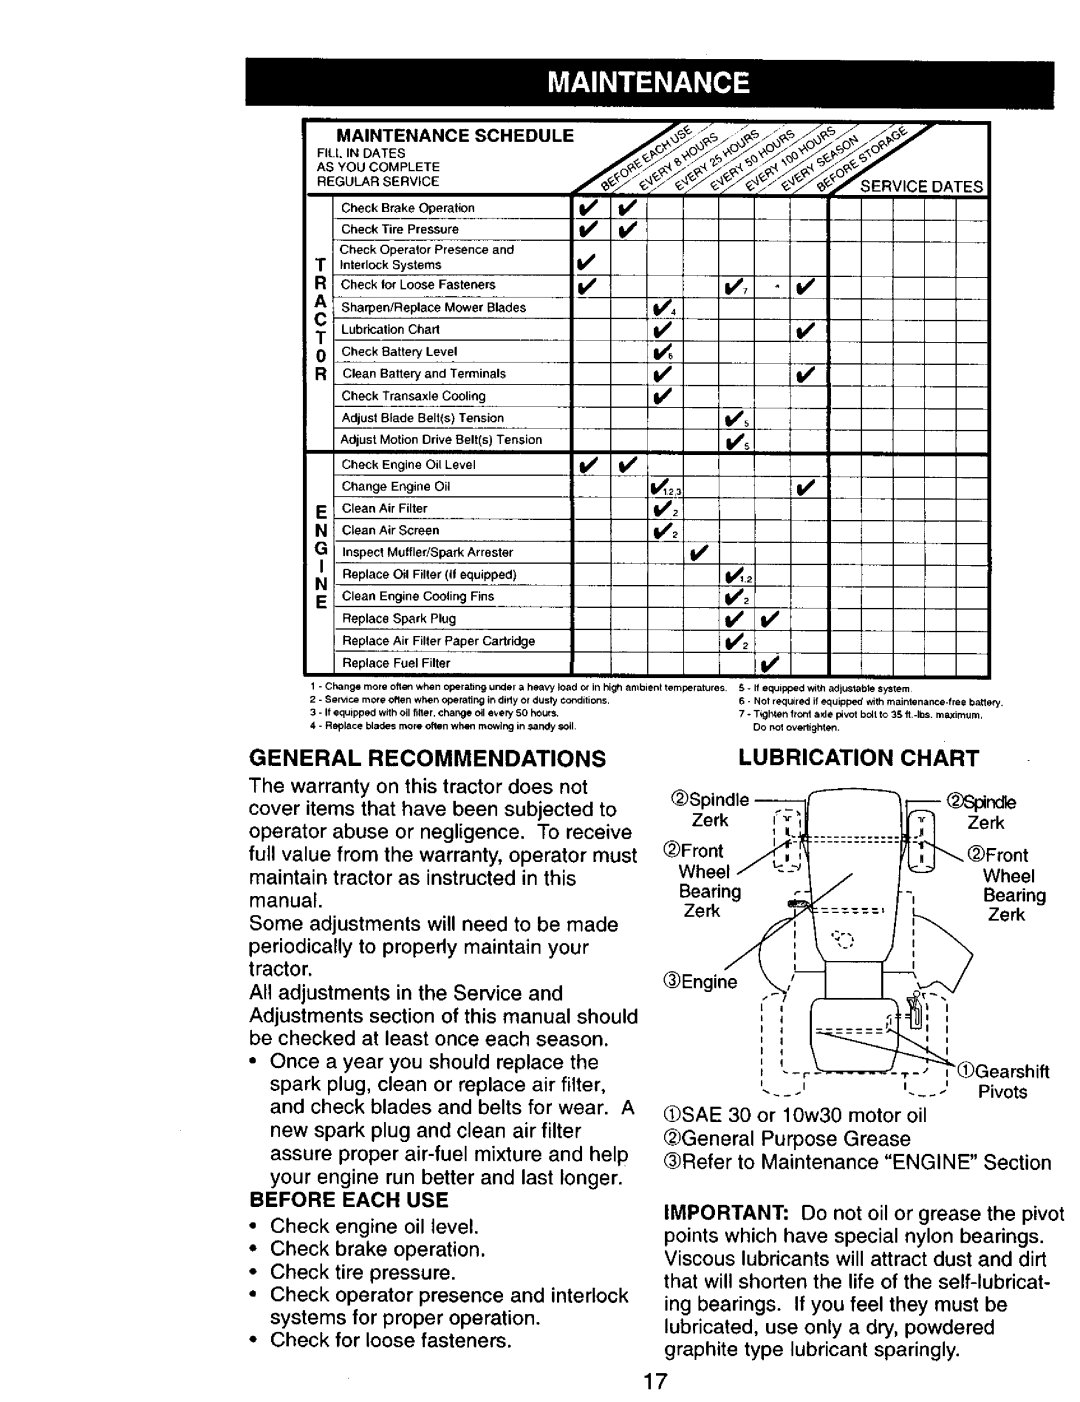 Craftsman 917.270751 owner manual General Recommendations, Lubrication Chart, Before Each USE 